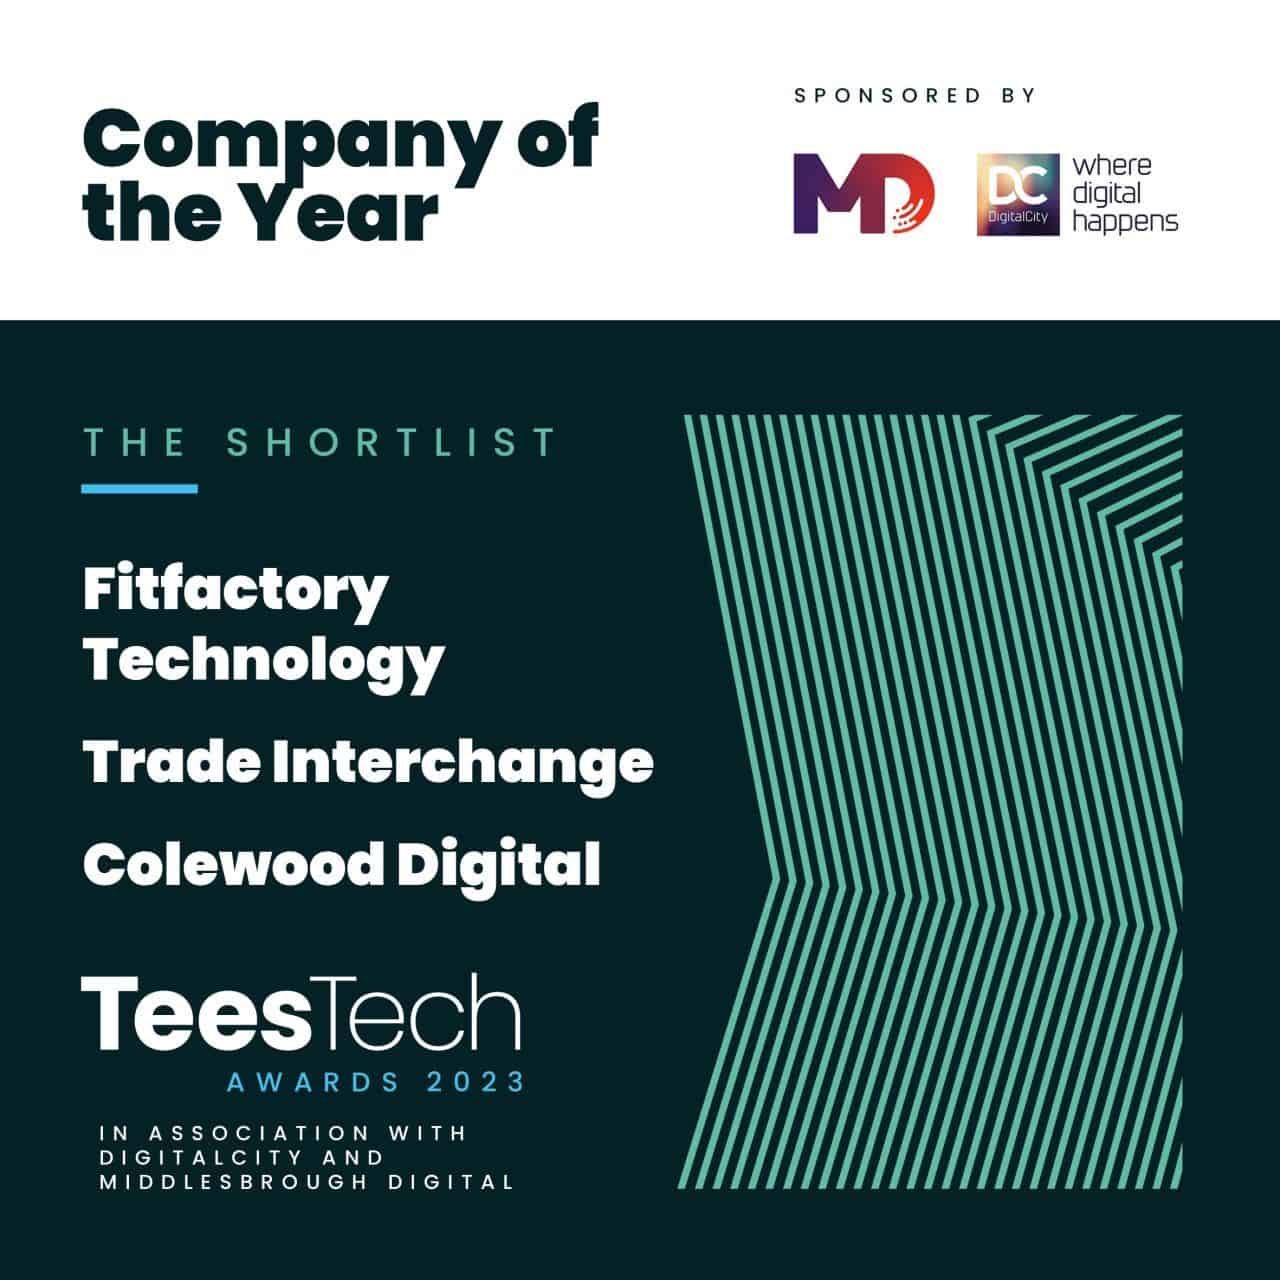 TeesTech-Company-of-the-Year